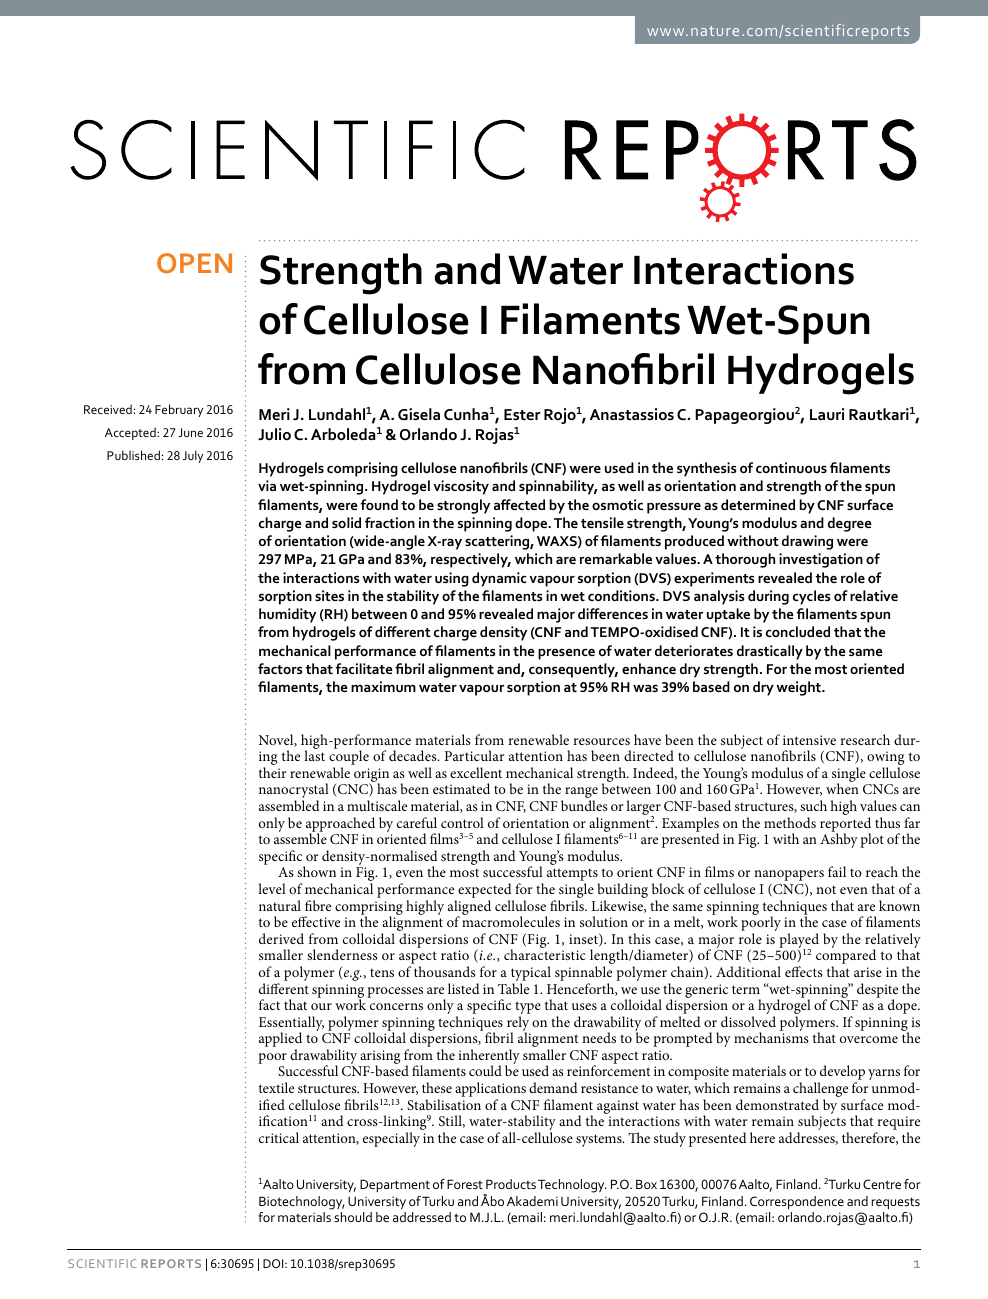 Strength And Water Interactions Of Cellulose I Filaments Wet Spun From Cellulose Nanofibril Hydrogels Topic Of Research Paper In Nano Technology Download Scholarly Article Pdf And Read For Free On Cyberleninka Open Science